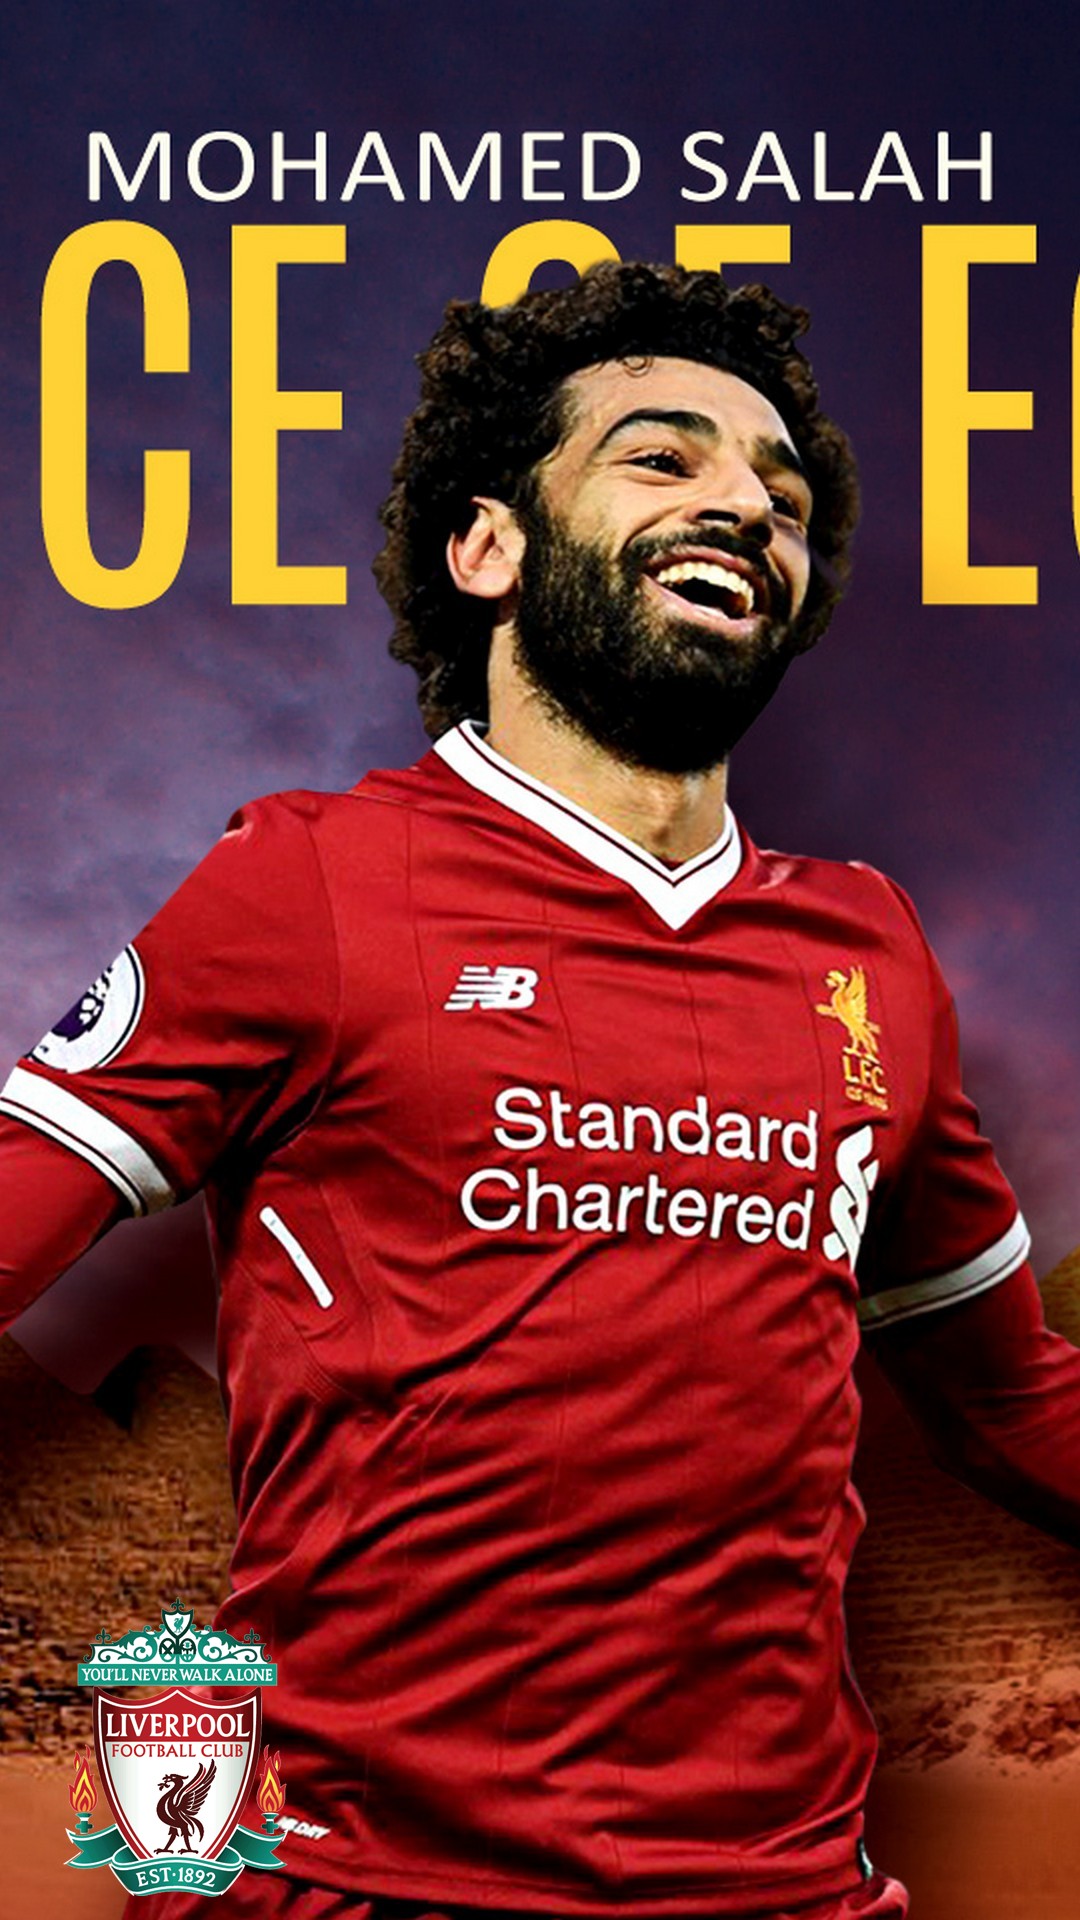 iPhone X Wallpaper Mohamed Salah Liverpool with image resolution 1080x1920 pixel. You can make this wallpaper for your iPhone 5, 6, 7, 8, X backgrounds, Mobile Screensaver, or iPad Lock Screen